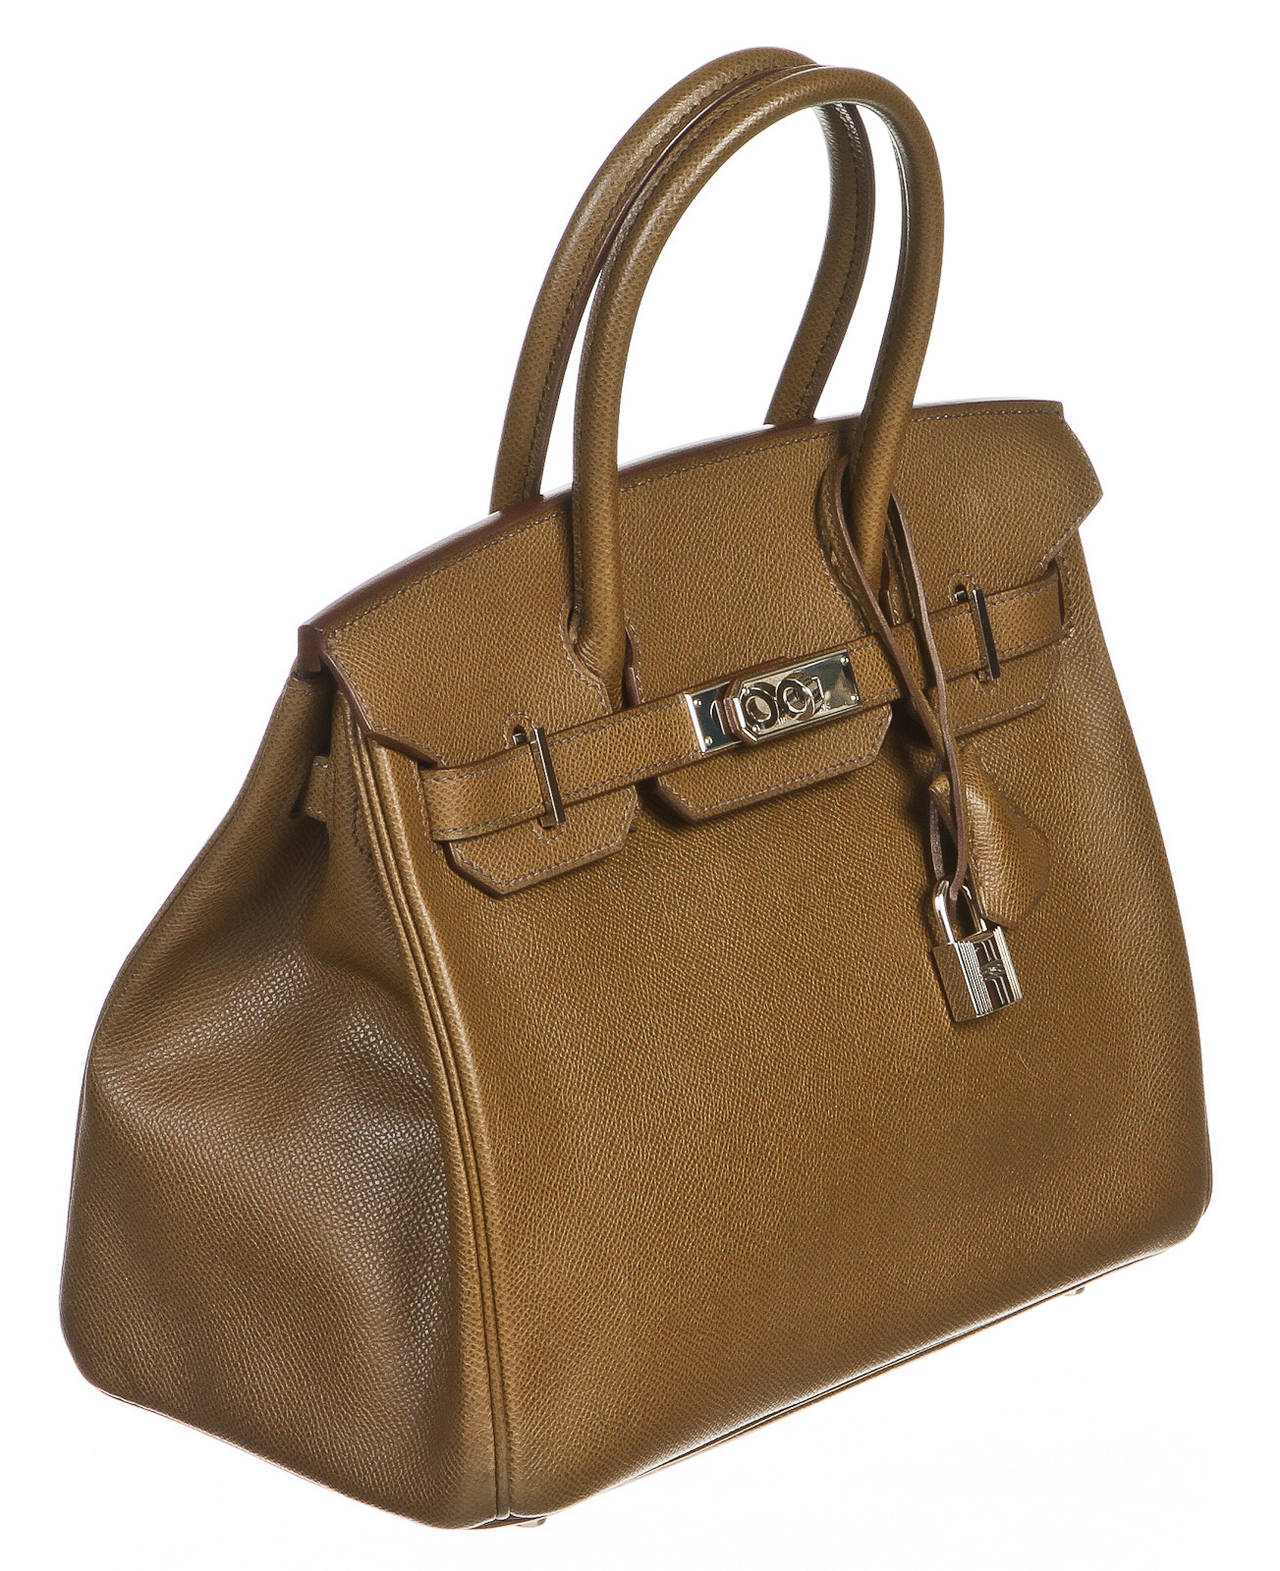 This exquisite satchel is one of the most sought after and most difficult to get handbags in the world. This is an 